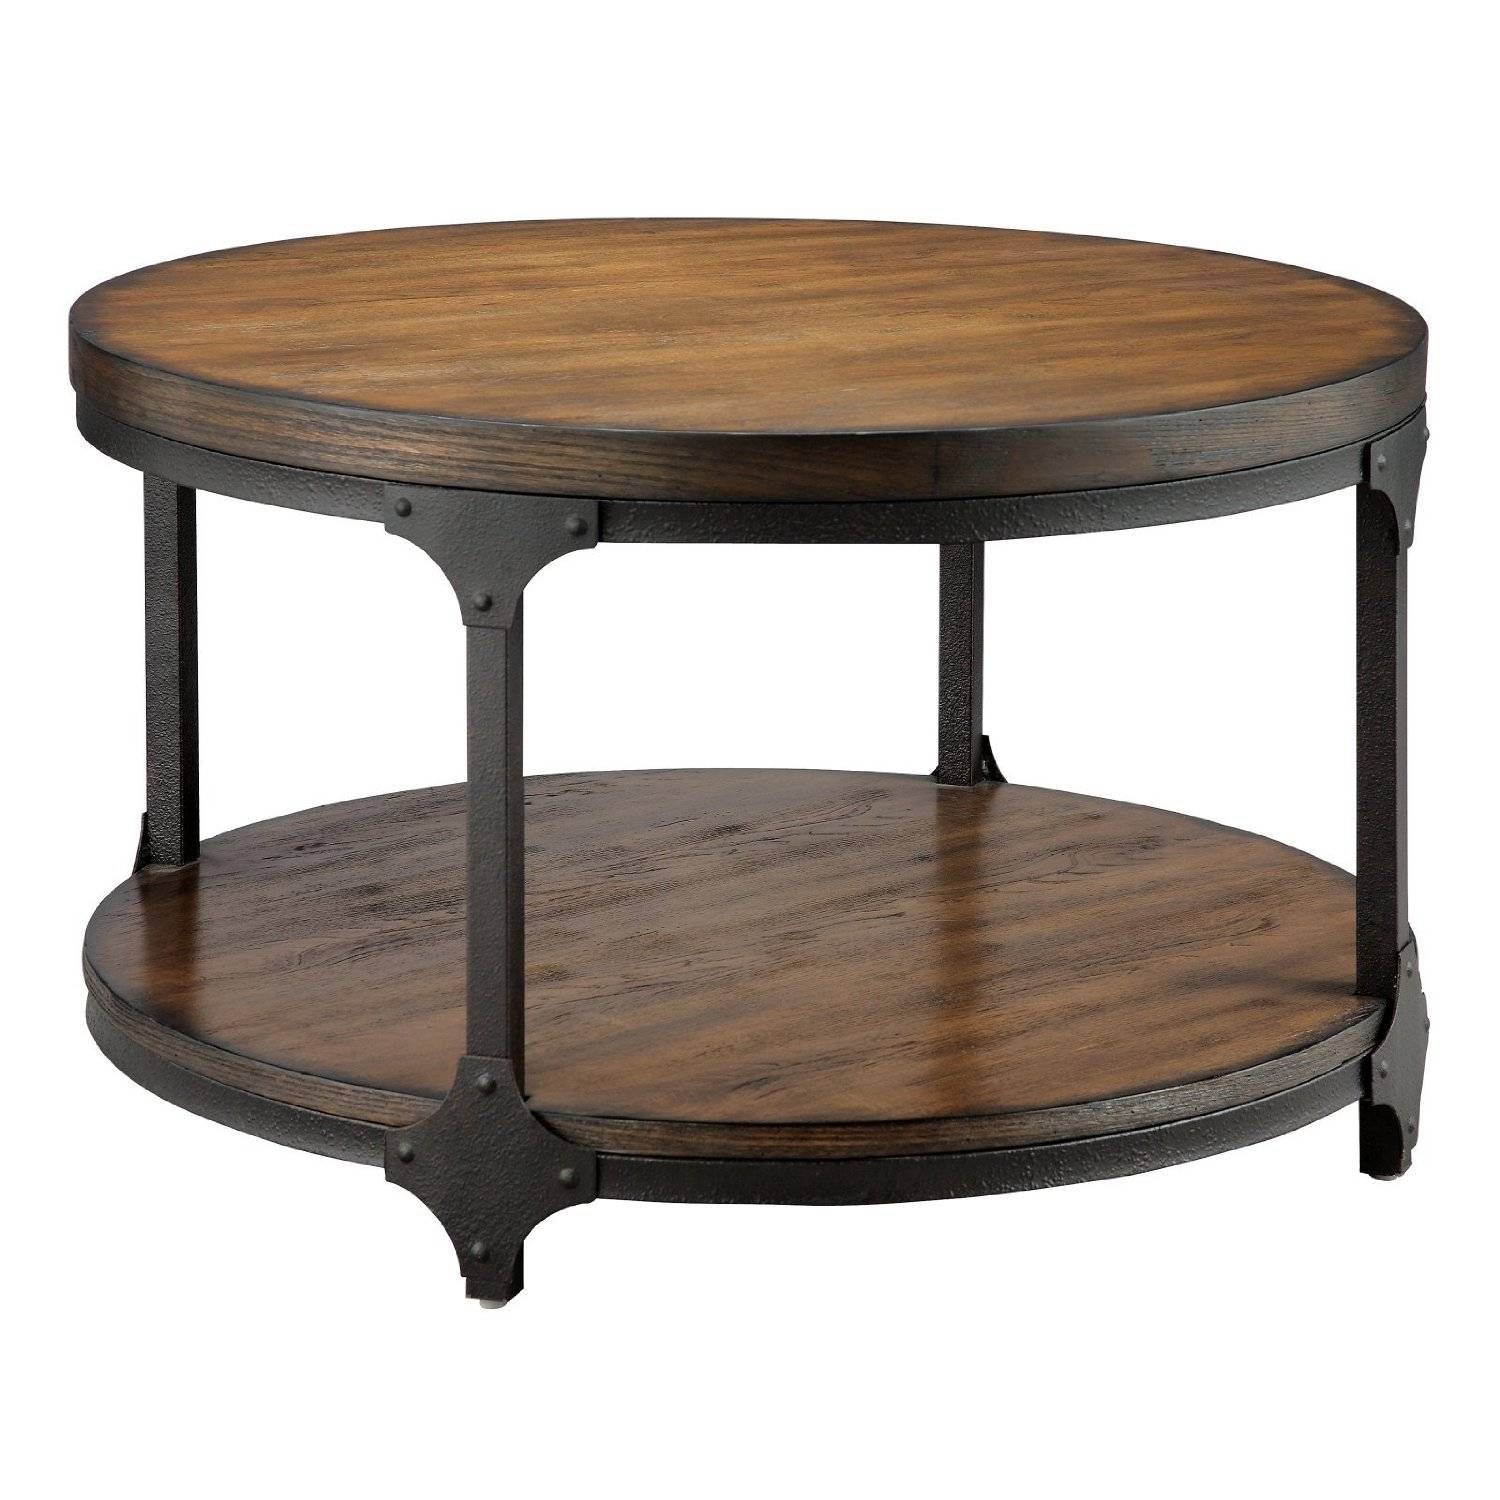 Coffee Table: Marvelous Reclaimed Wood Round Coffee Table Design Throughout Elegant Rustic Coffee Tables (View 28 of 30)